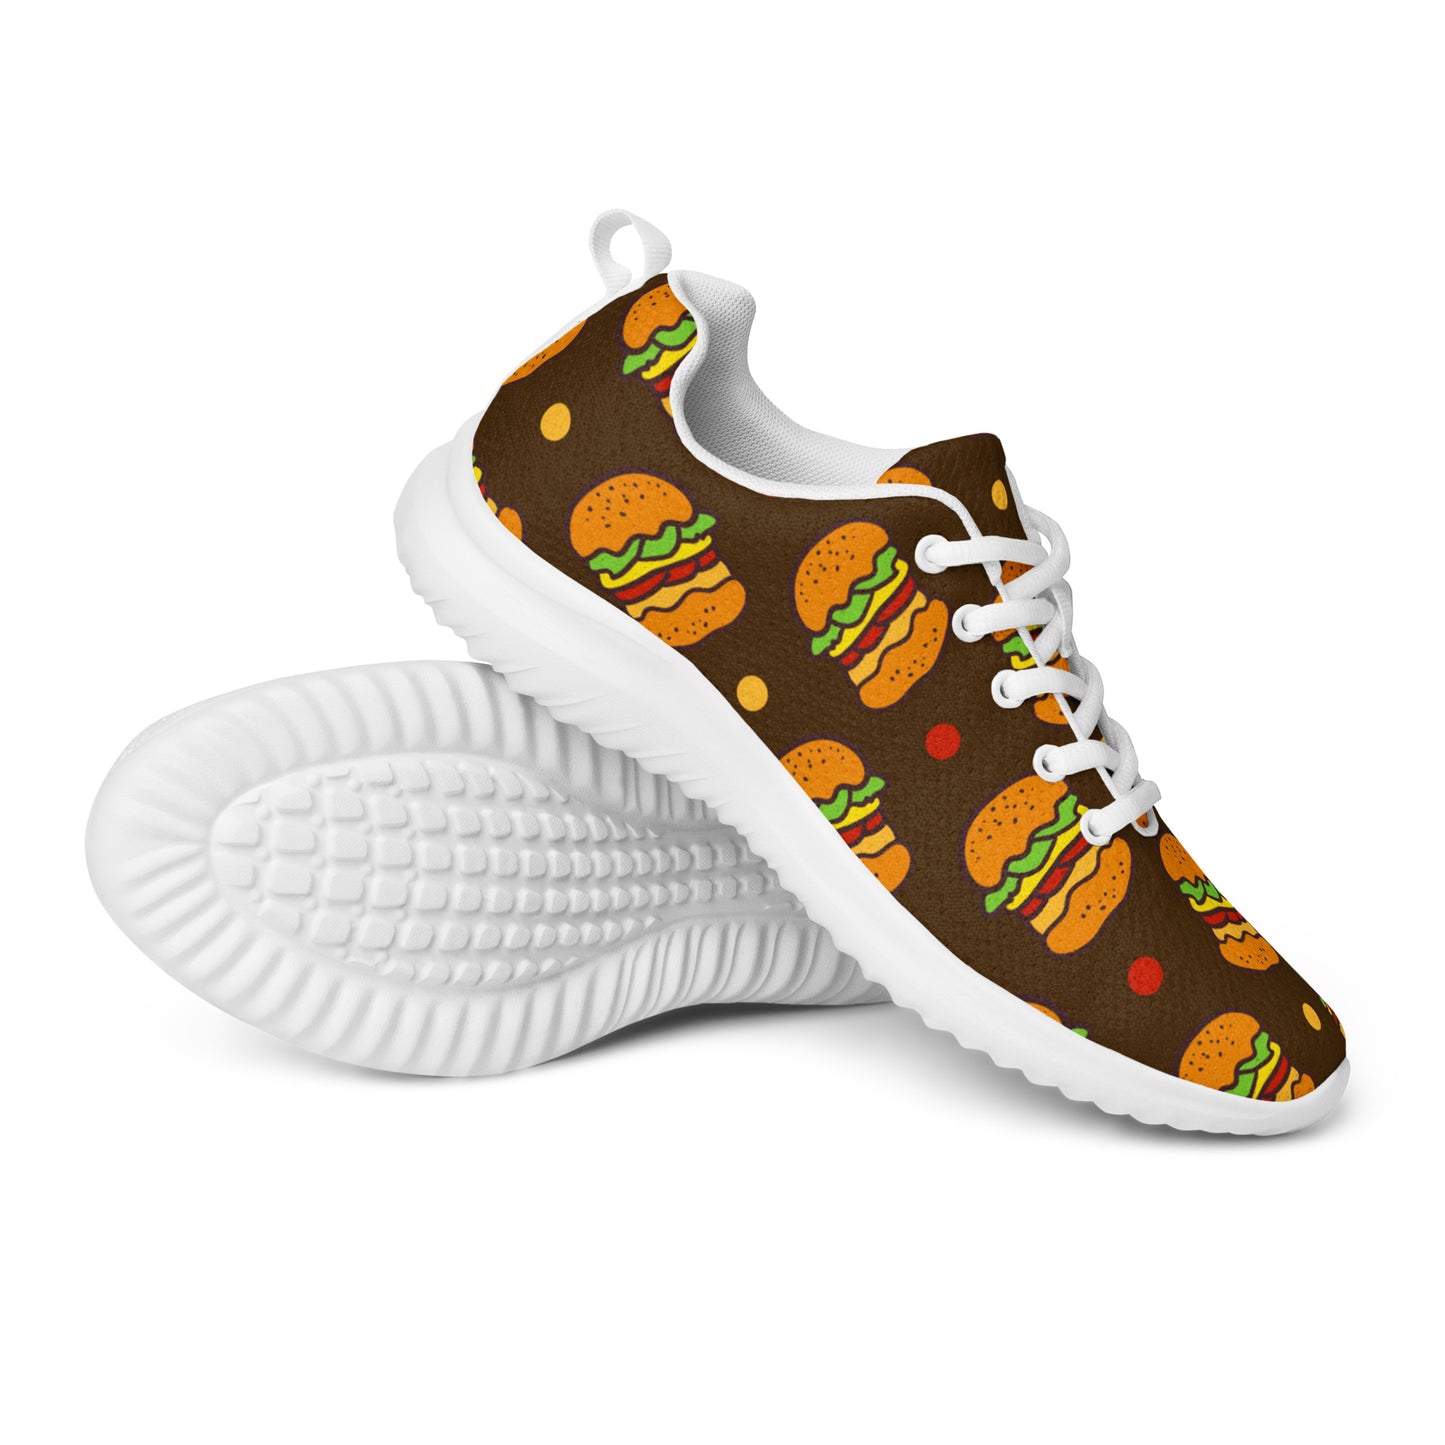 Burgers - Women’s athletic shoes Womens Athletic Shoes